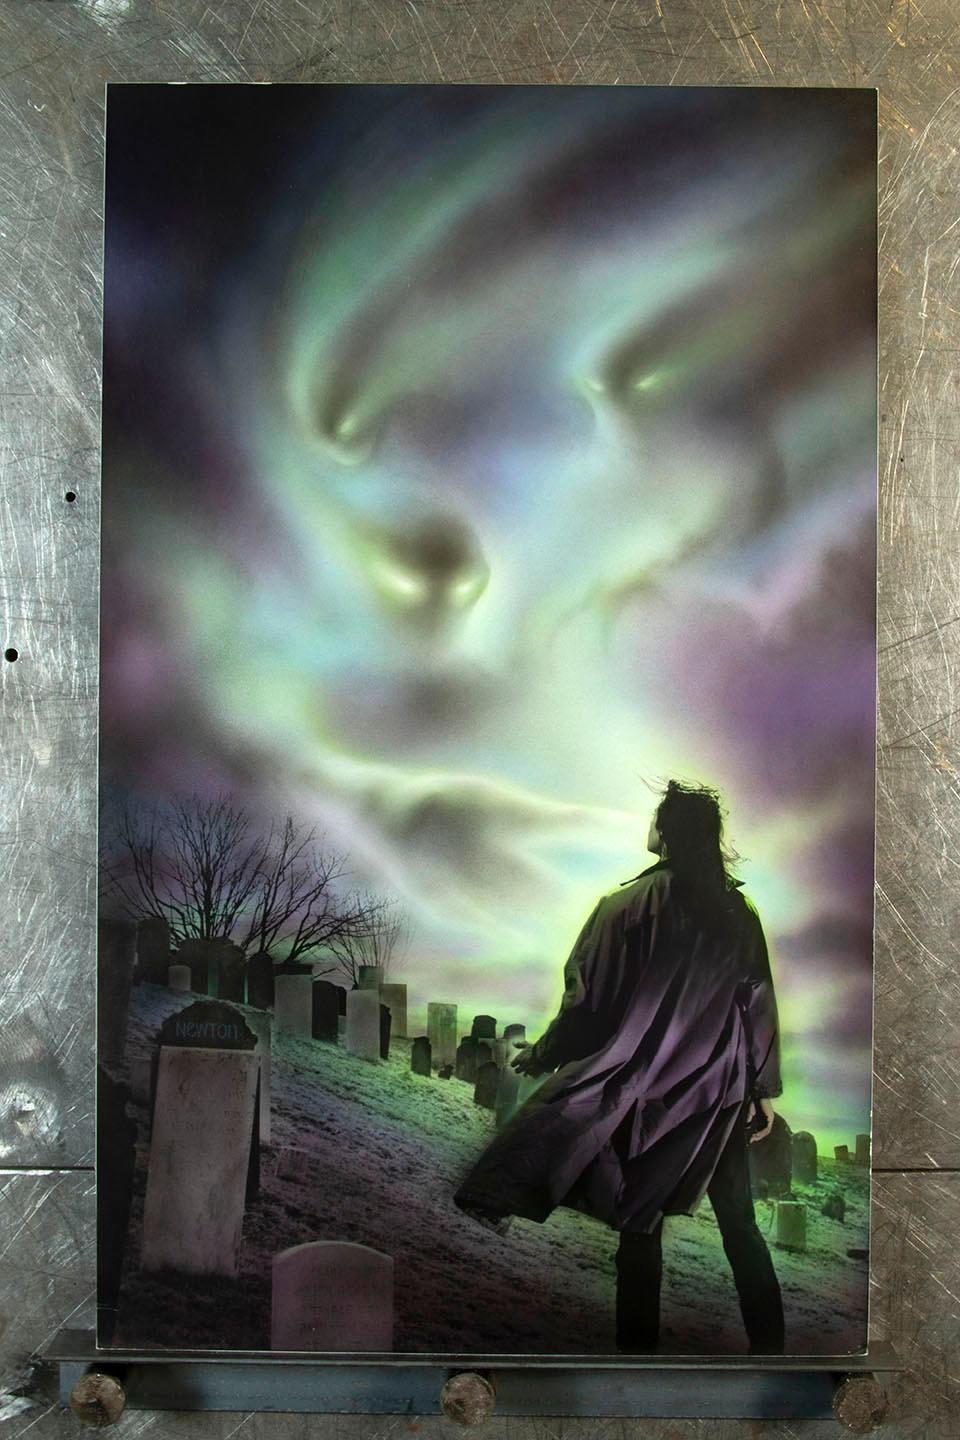 Graythings mixed media painting and original book cover.
Original mixed media airbrush, acrylic and oil painting, including original book cover.
This atmospheric cover art was created for a book by Pat Graversen about spirits from another world